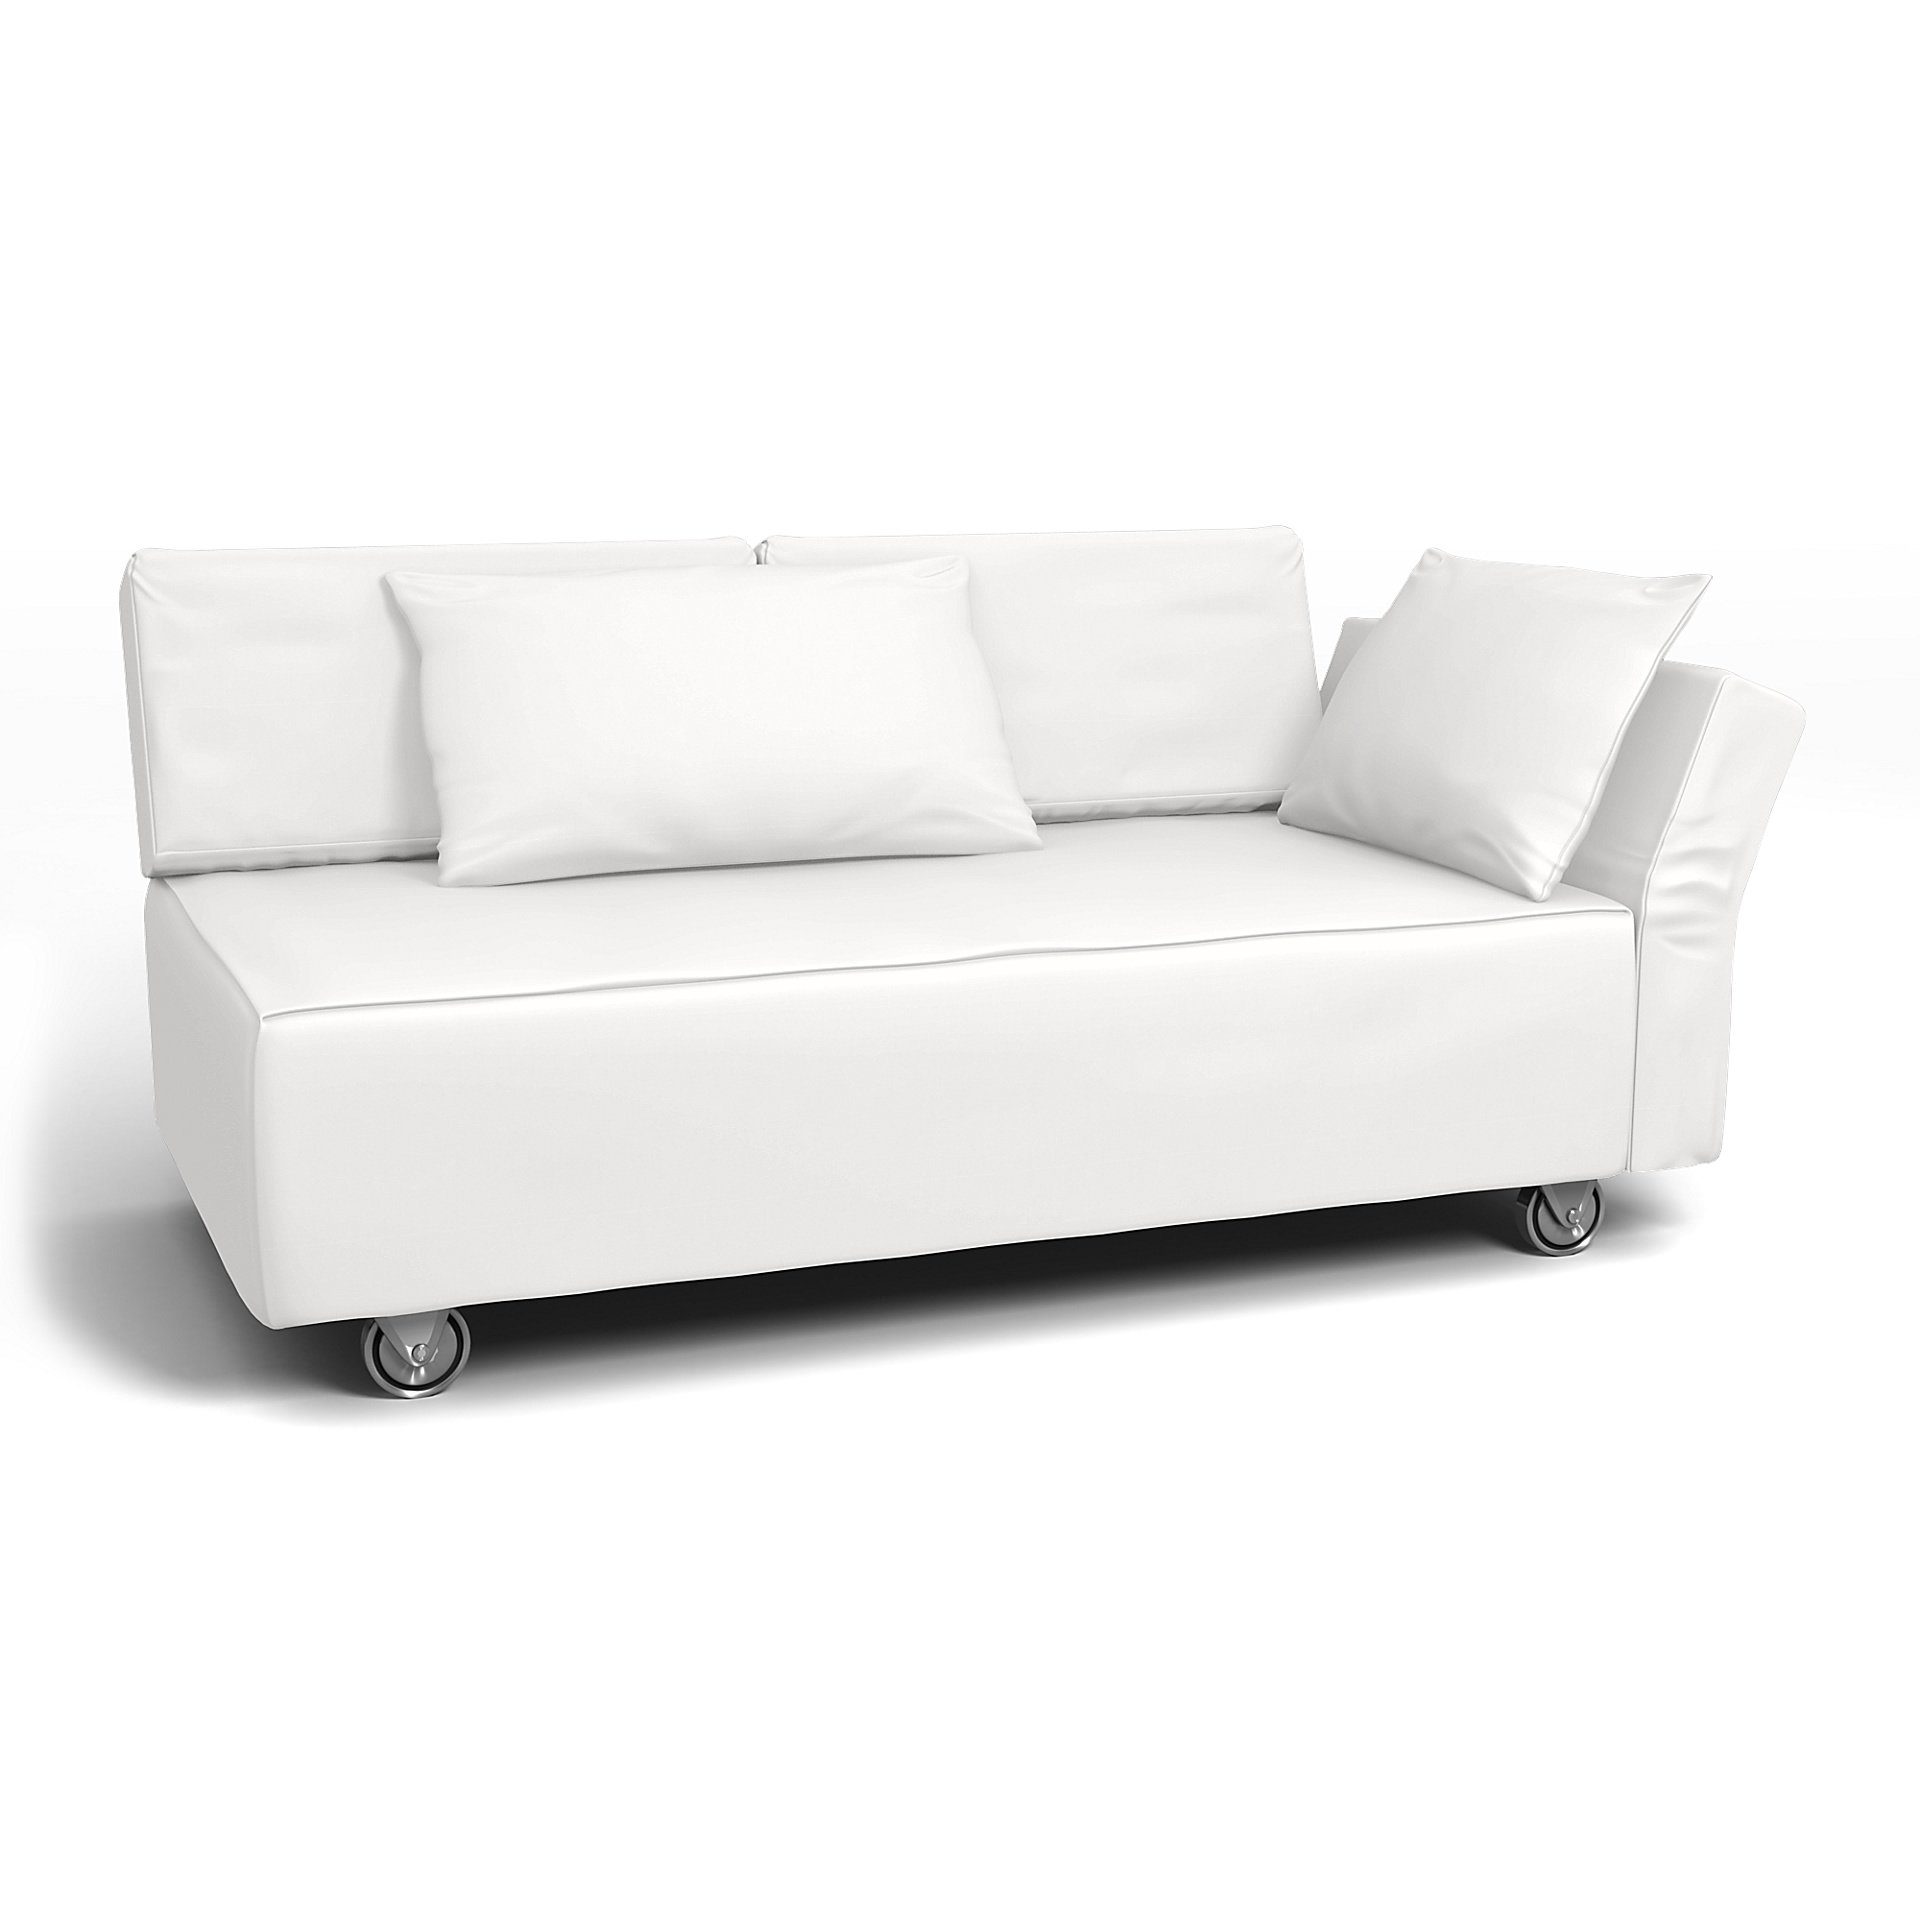 IKEA - Falsterbo 2 Seat Sofa with Right Arm Cover, Absolute White, Cotton - Bemz